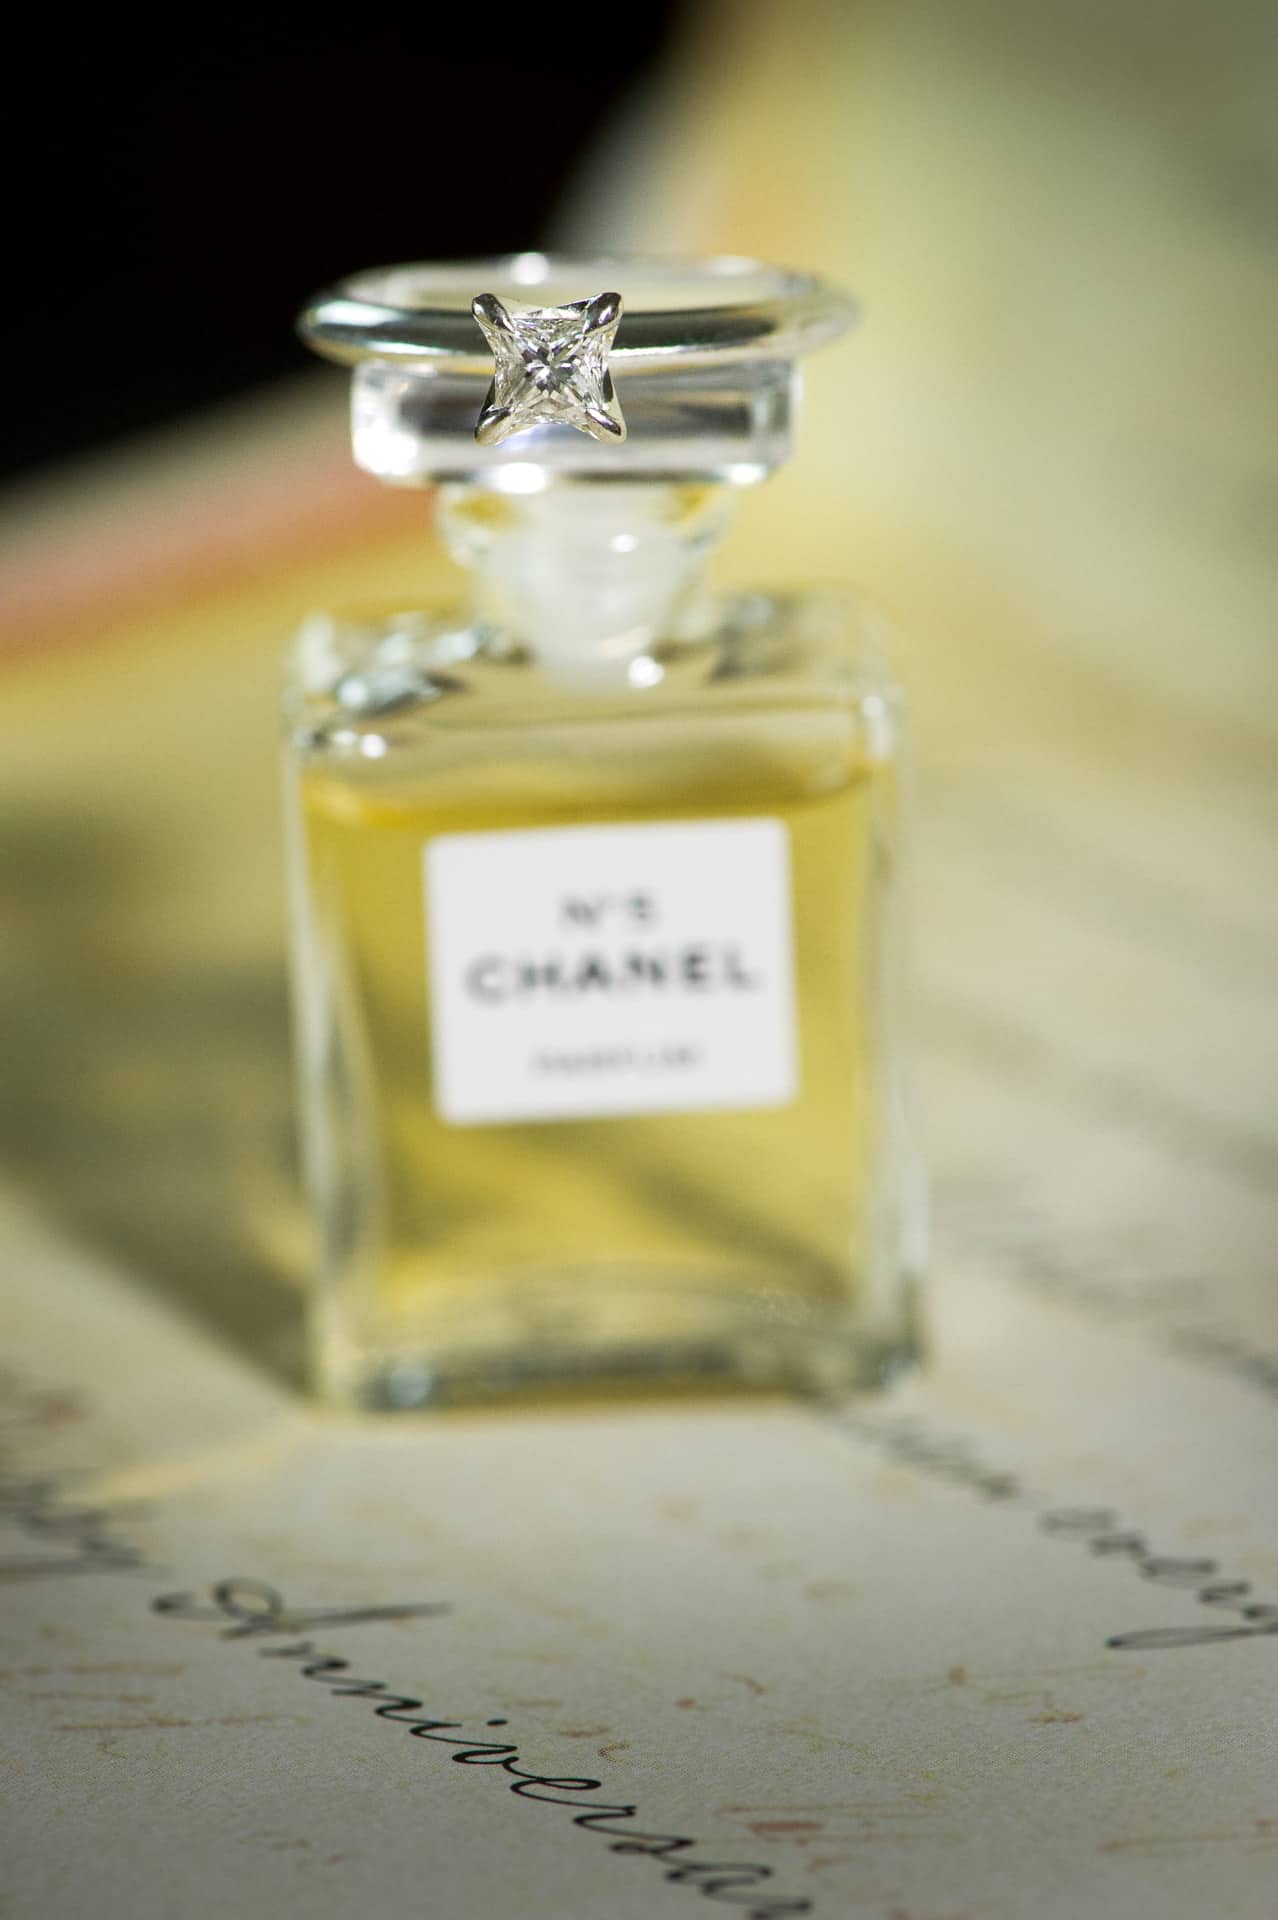 Square-shaped diamond ring with Chanel No.5